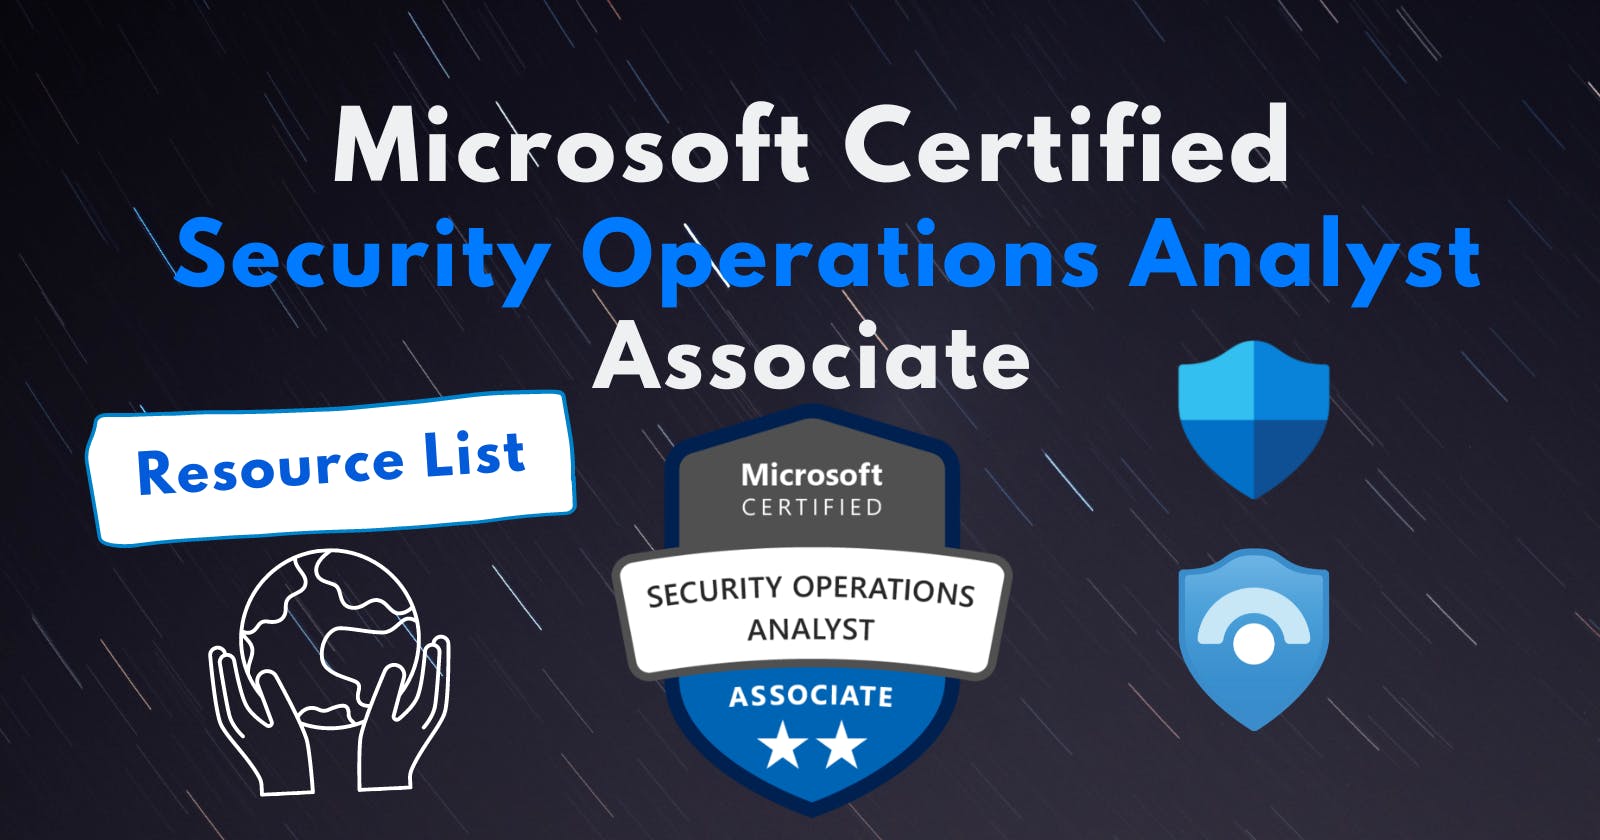 Microsoft Certified: Security Operations Analyst Associate | Resources